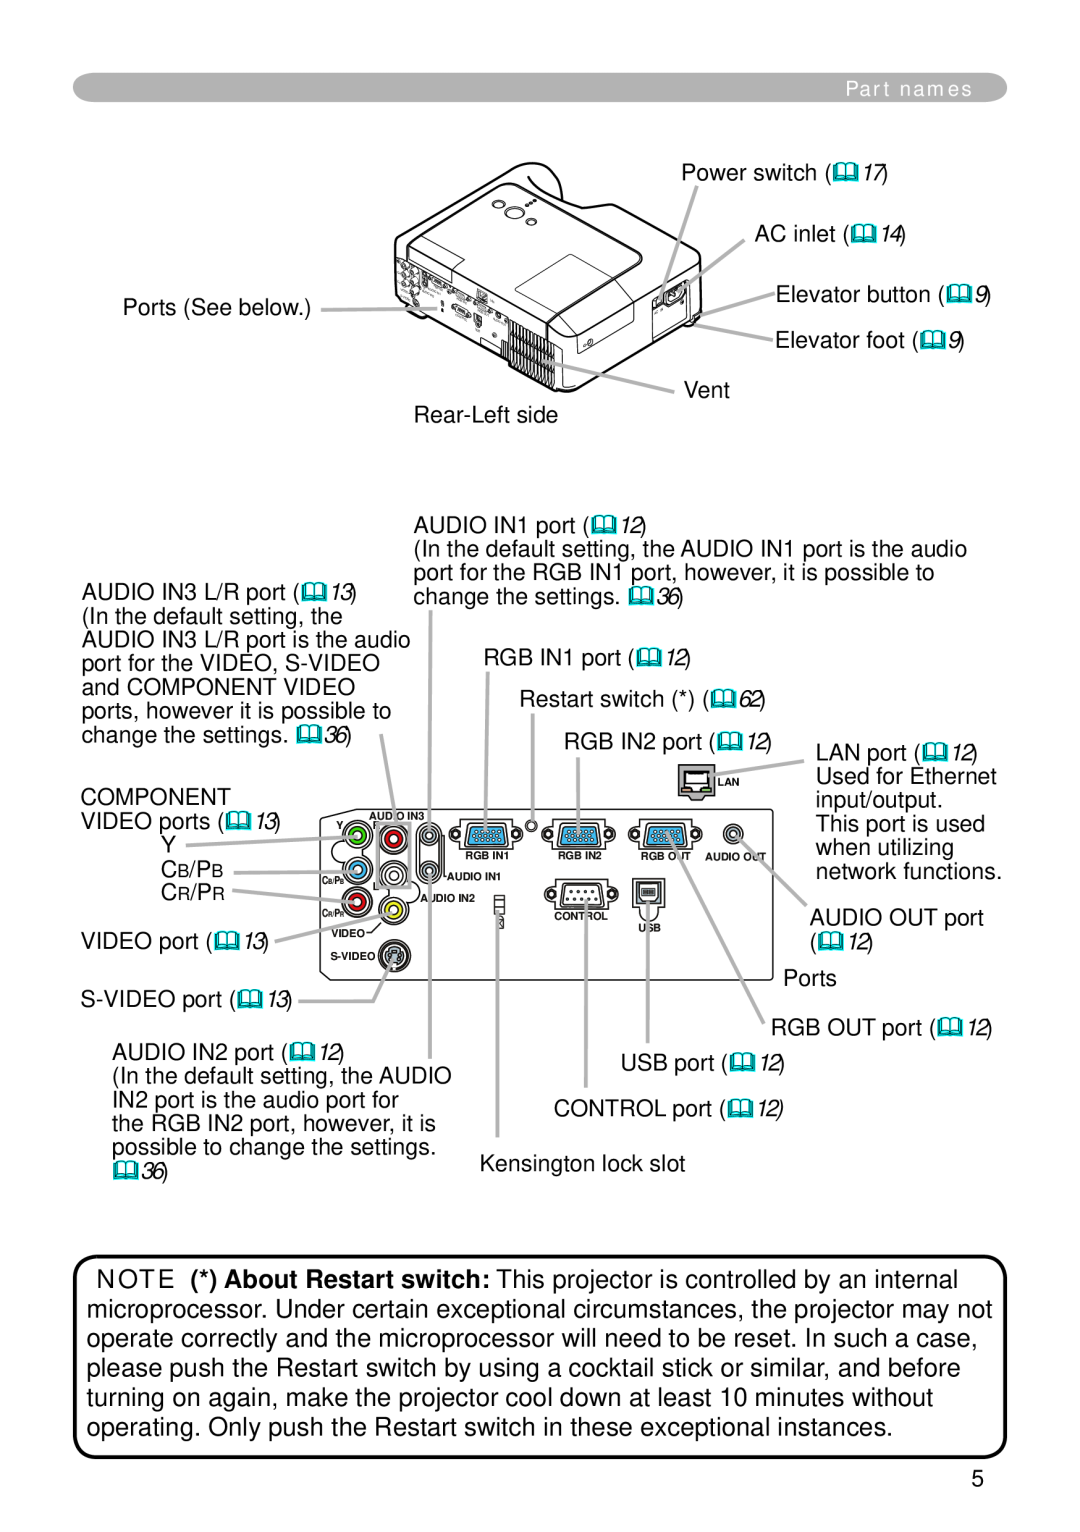 Hitachi CP-X265 user manual Restart switch * 62, network functions, CONTROL port 12, possible to change the settings 